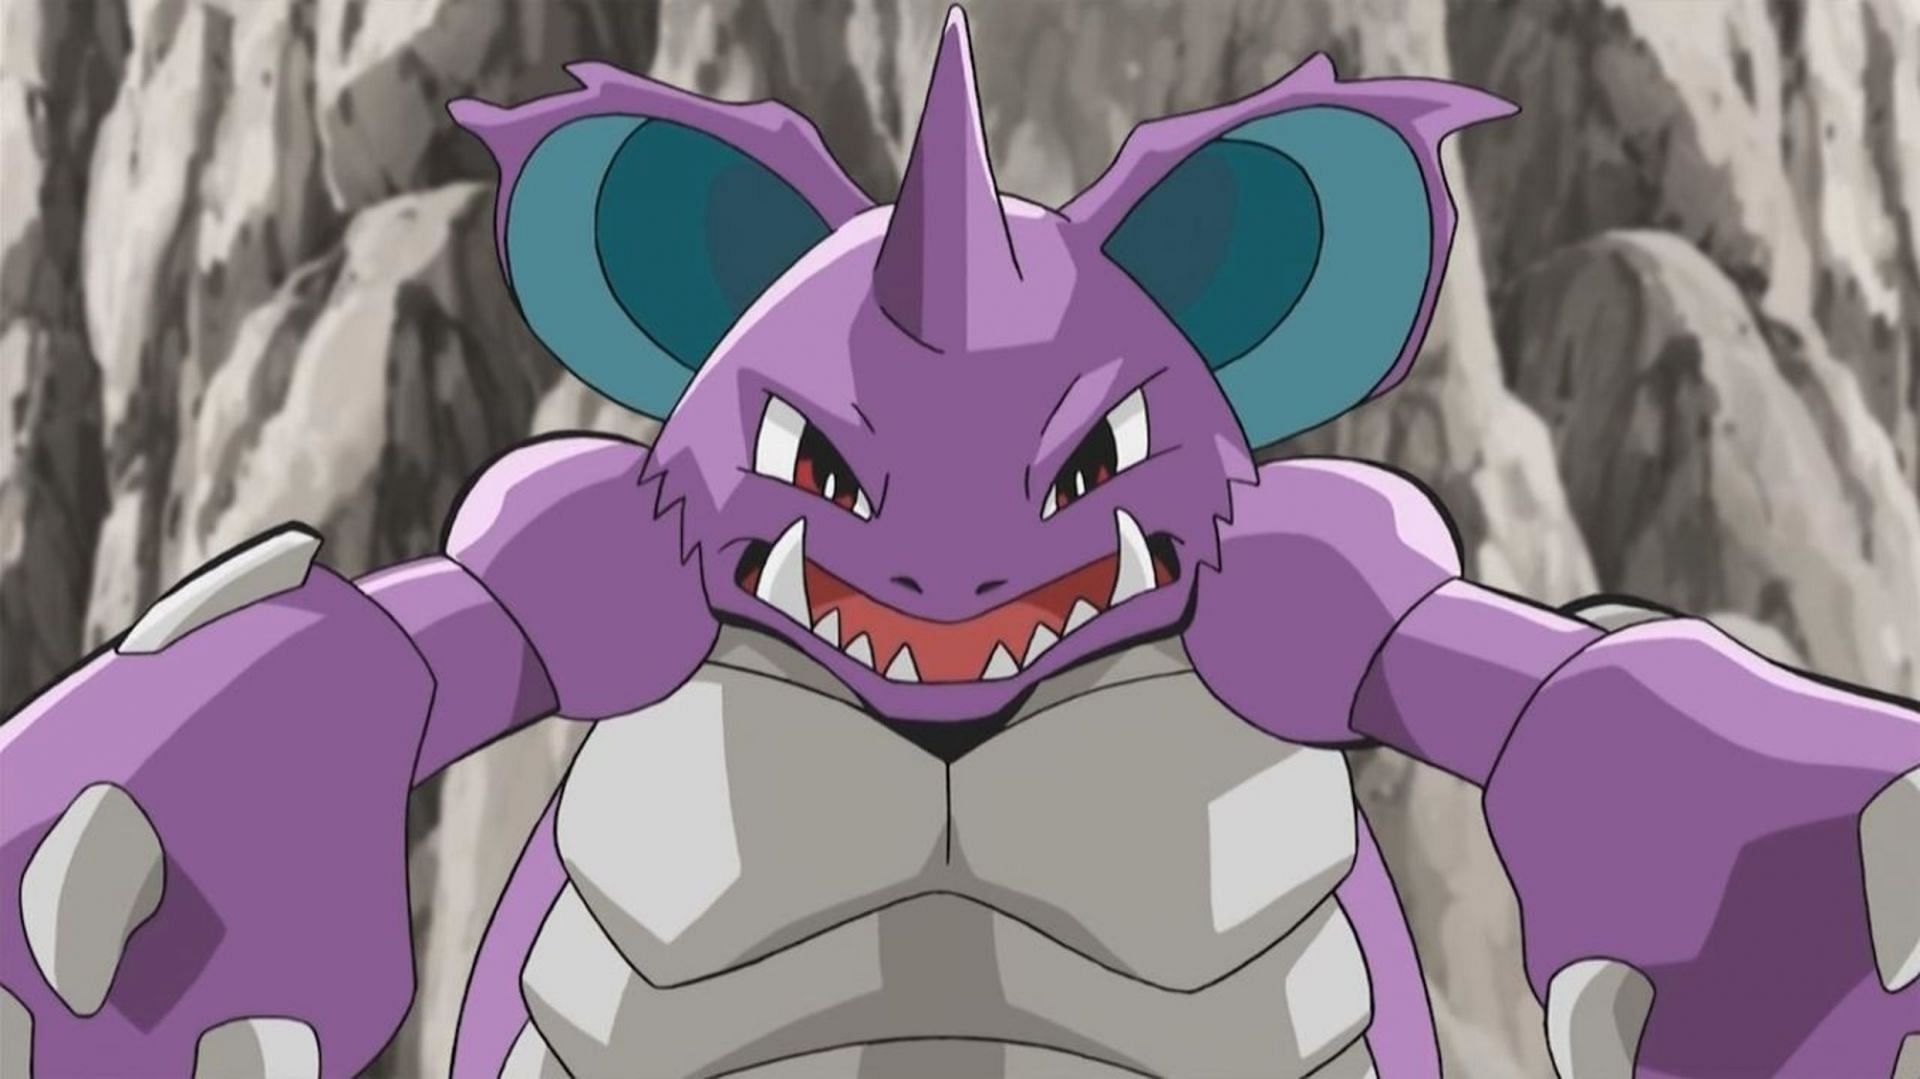 Nidoking is a Ground/Poison-type Pokemon favored by the likes of Giovanni (Image via The Pokemon Company)